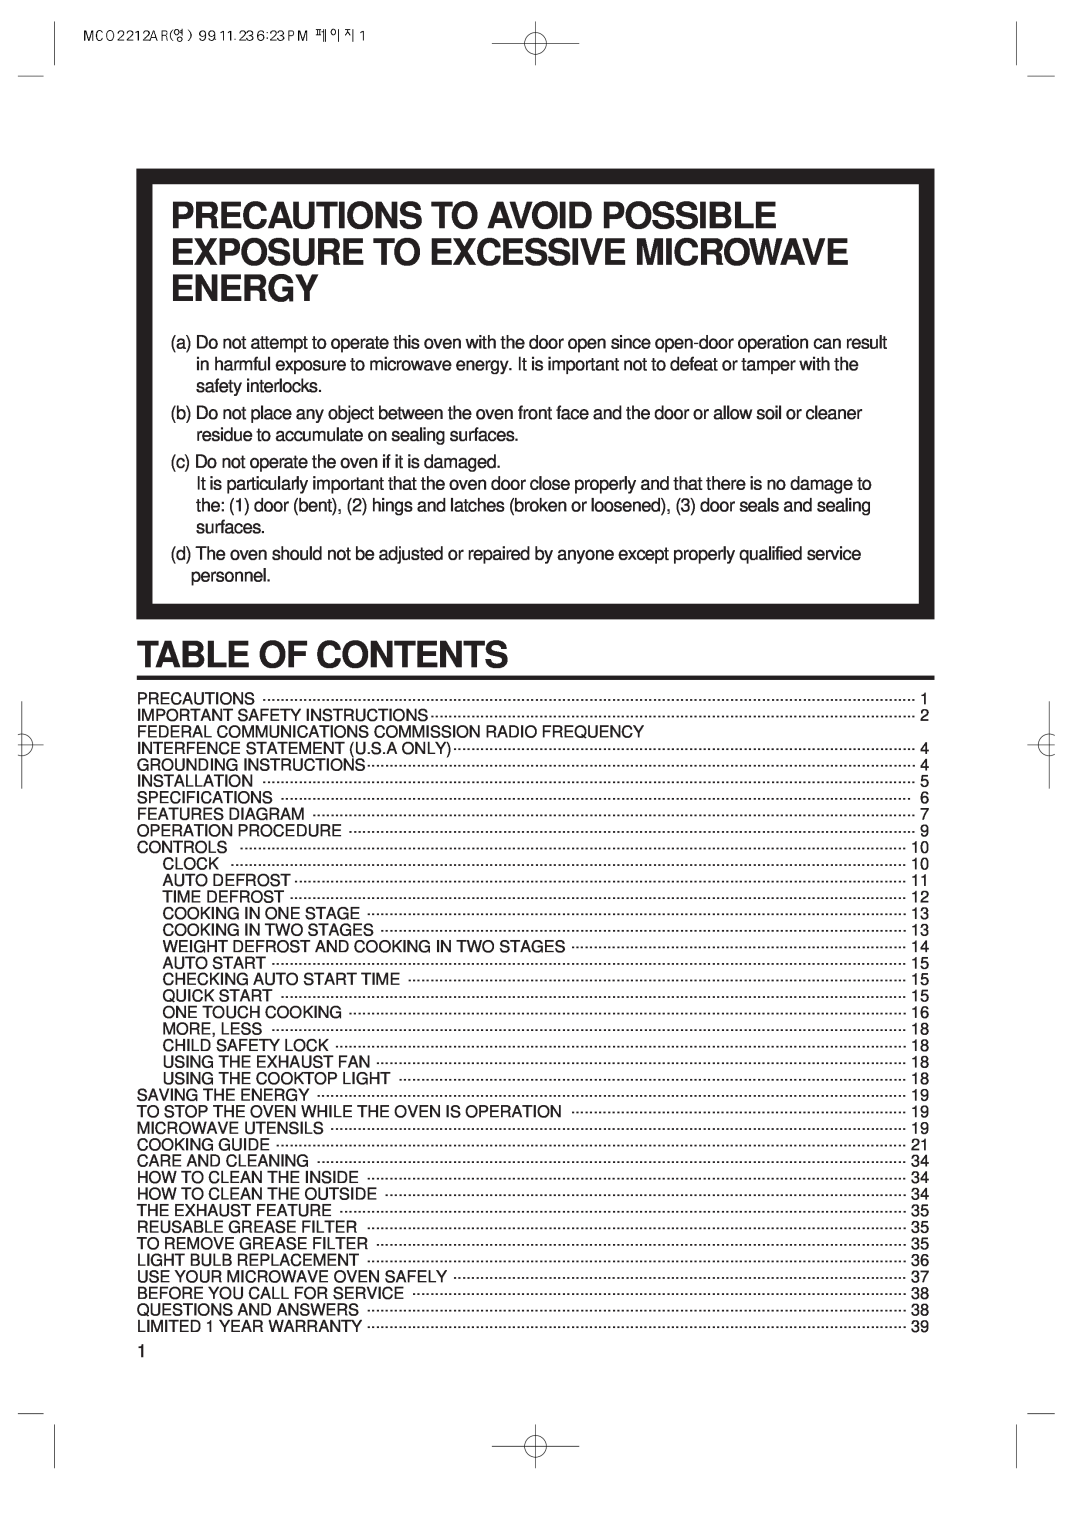 Magic Chef MCO2212AR manual Precautions To Avoid Possible Exposure To Excessive Microwave Energy, Table Of Contents 